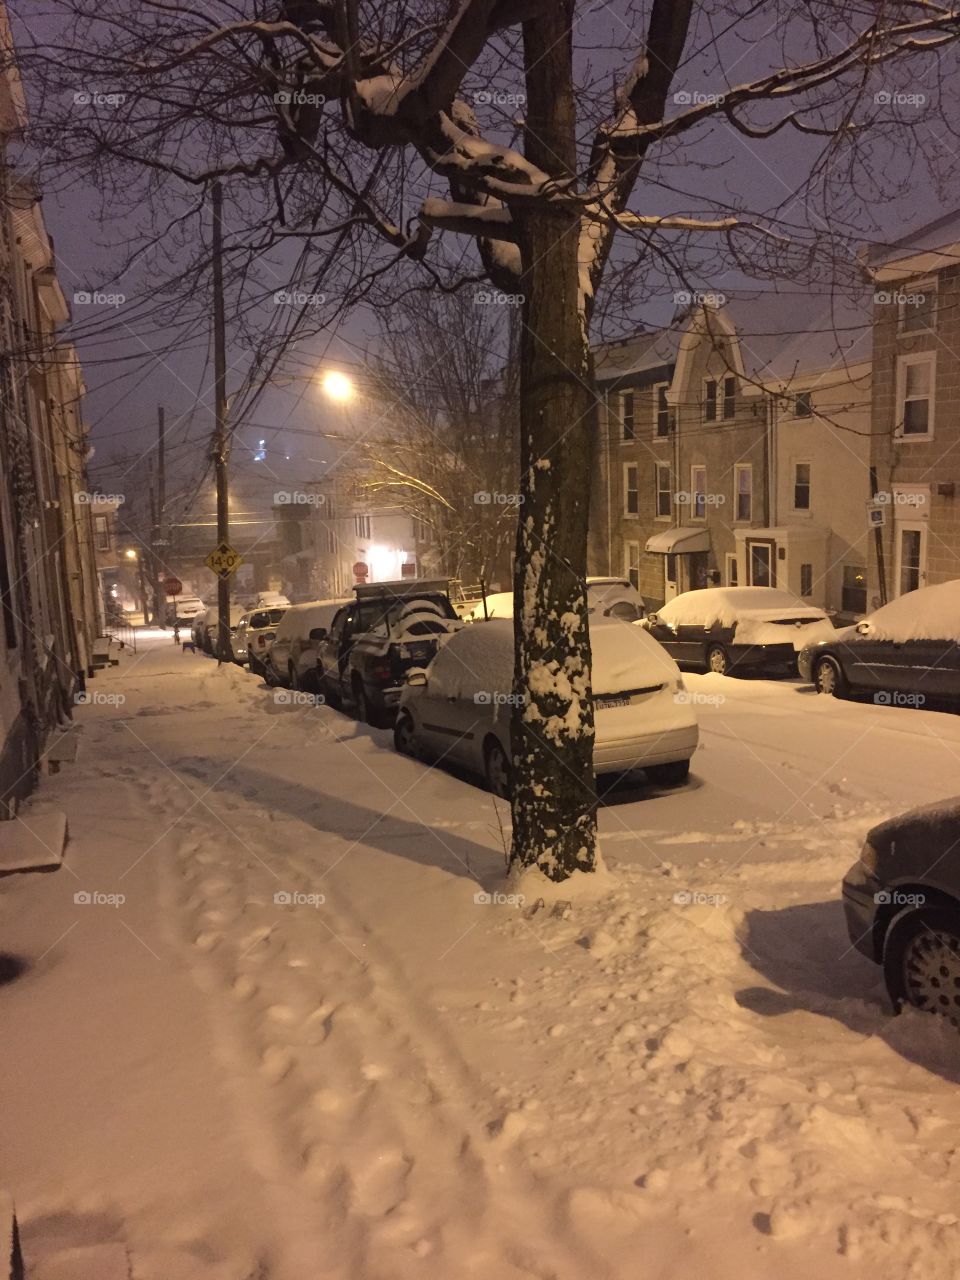 Philly's only snow storm this winter